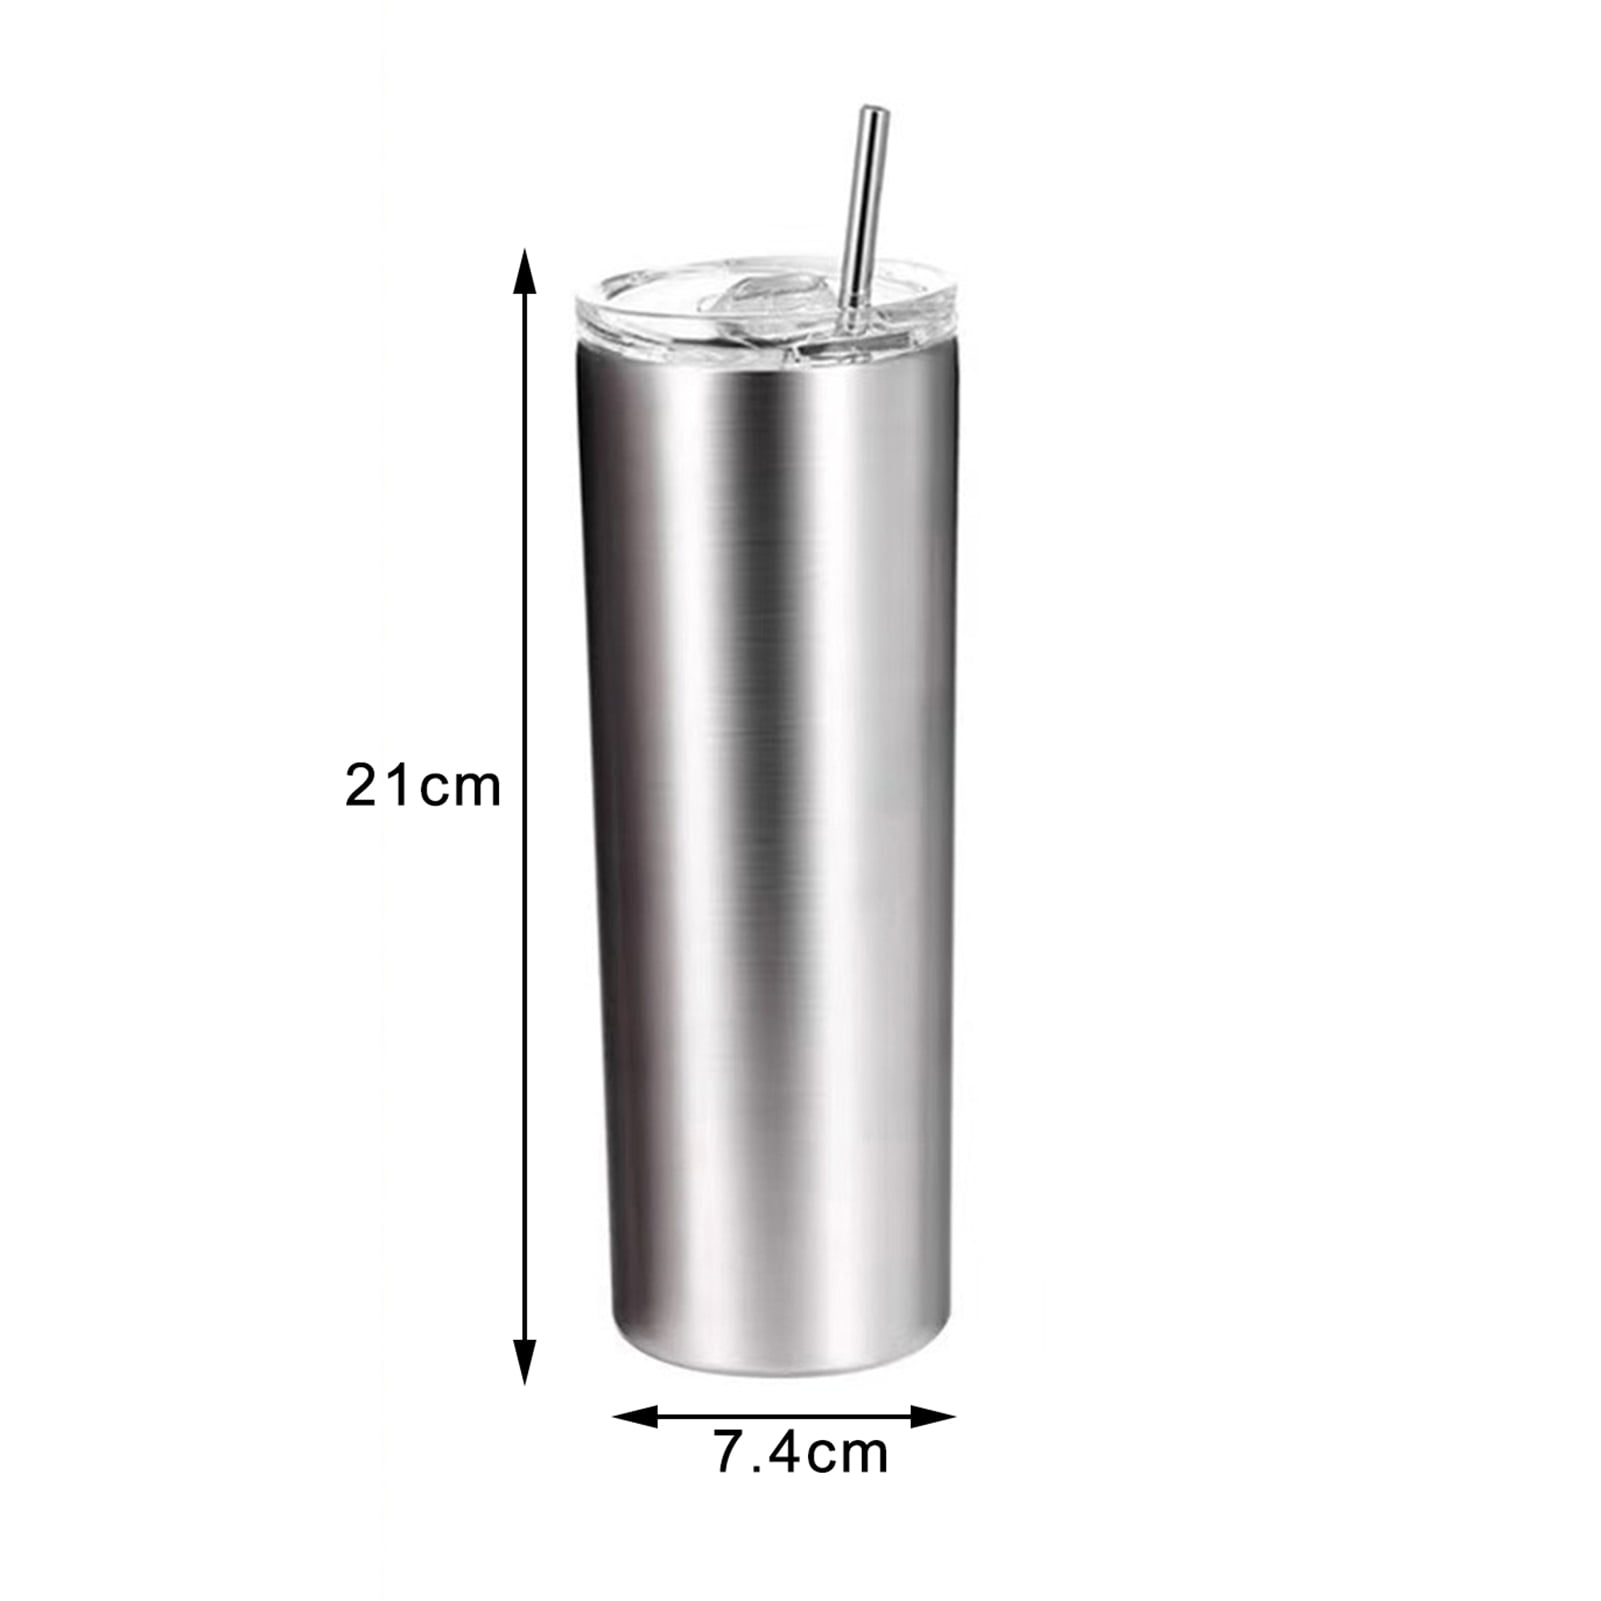 Dee duoduo Double Wall Skinny Tumbler with Straw and Lid, Insulated Coffee  Cup Stainless Steel Slim Travel Tumbler for Women and Men (Purple, 20 oz)